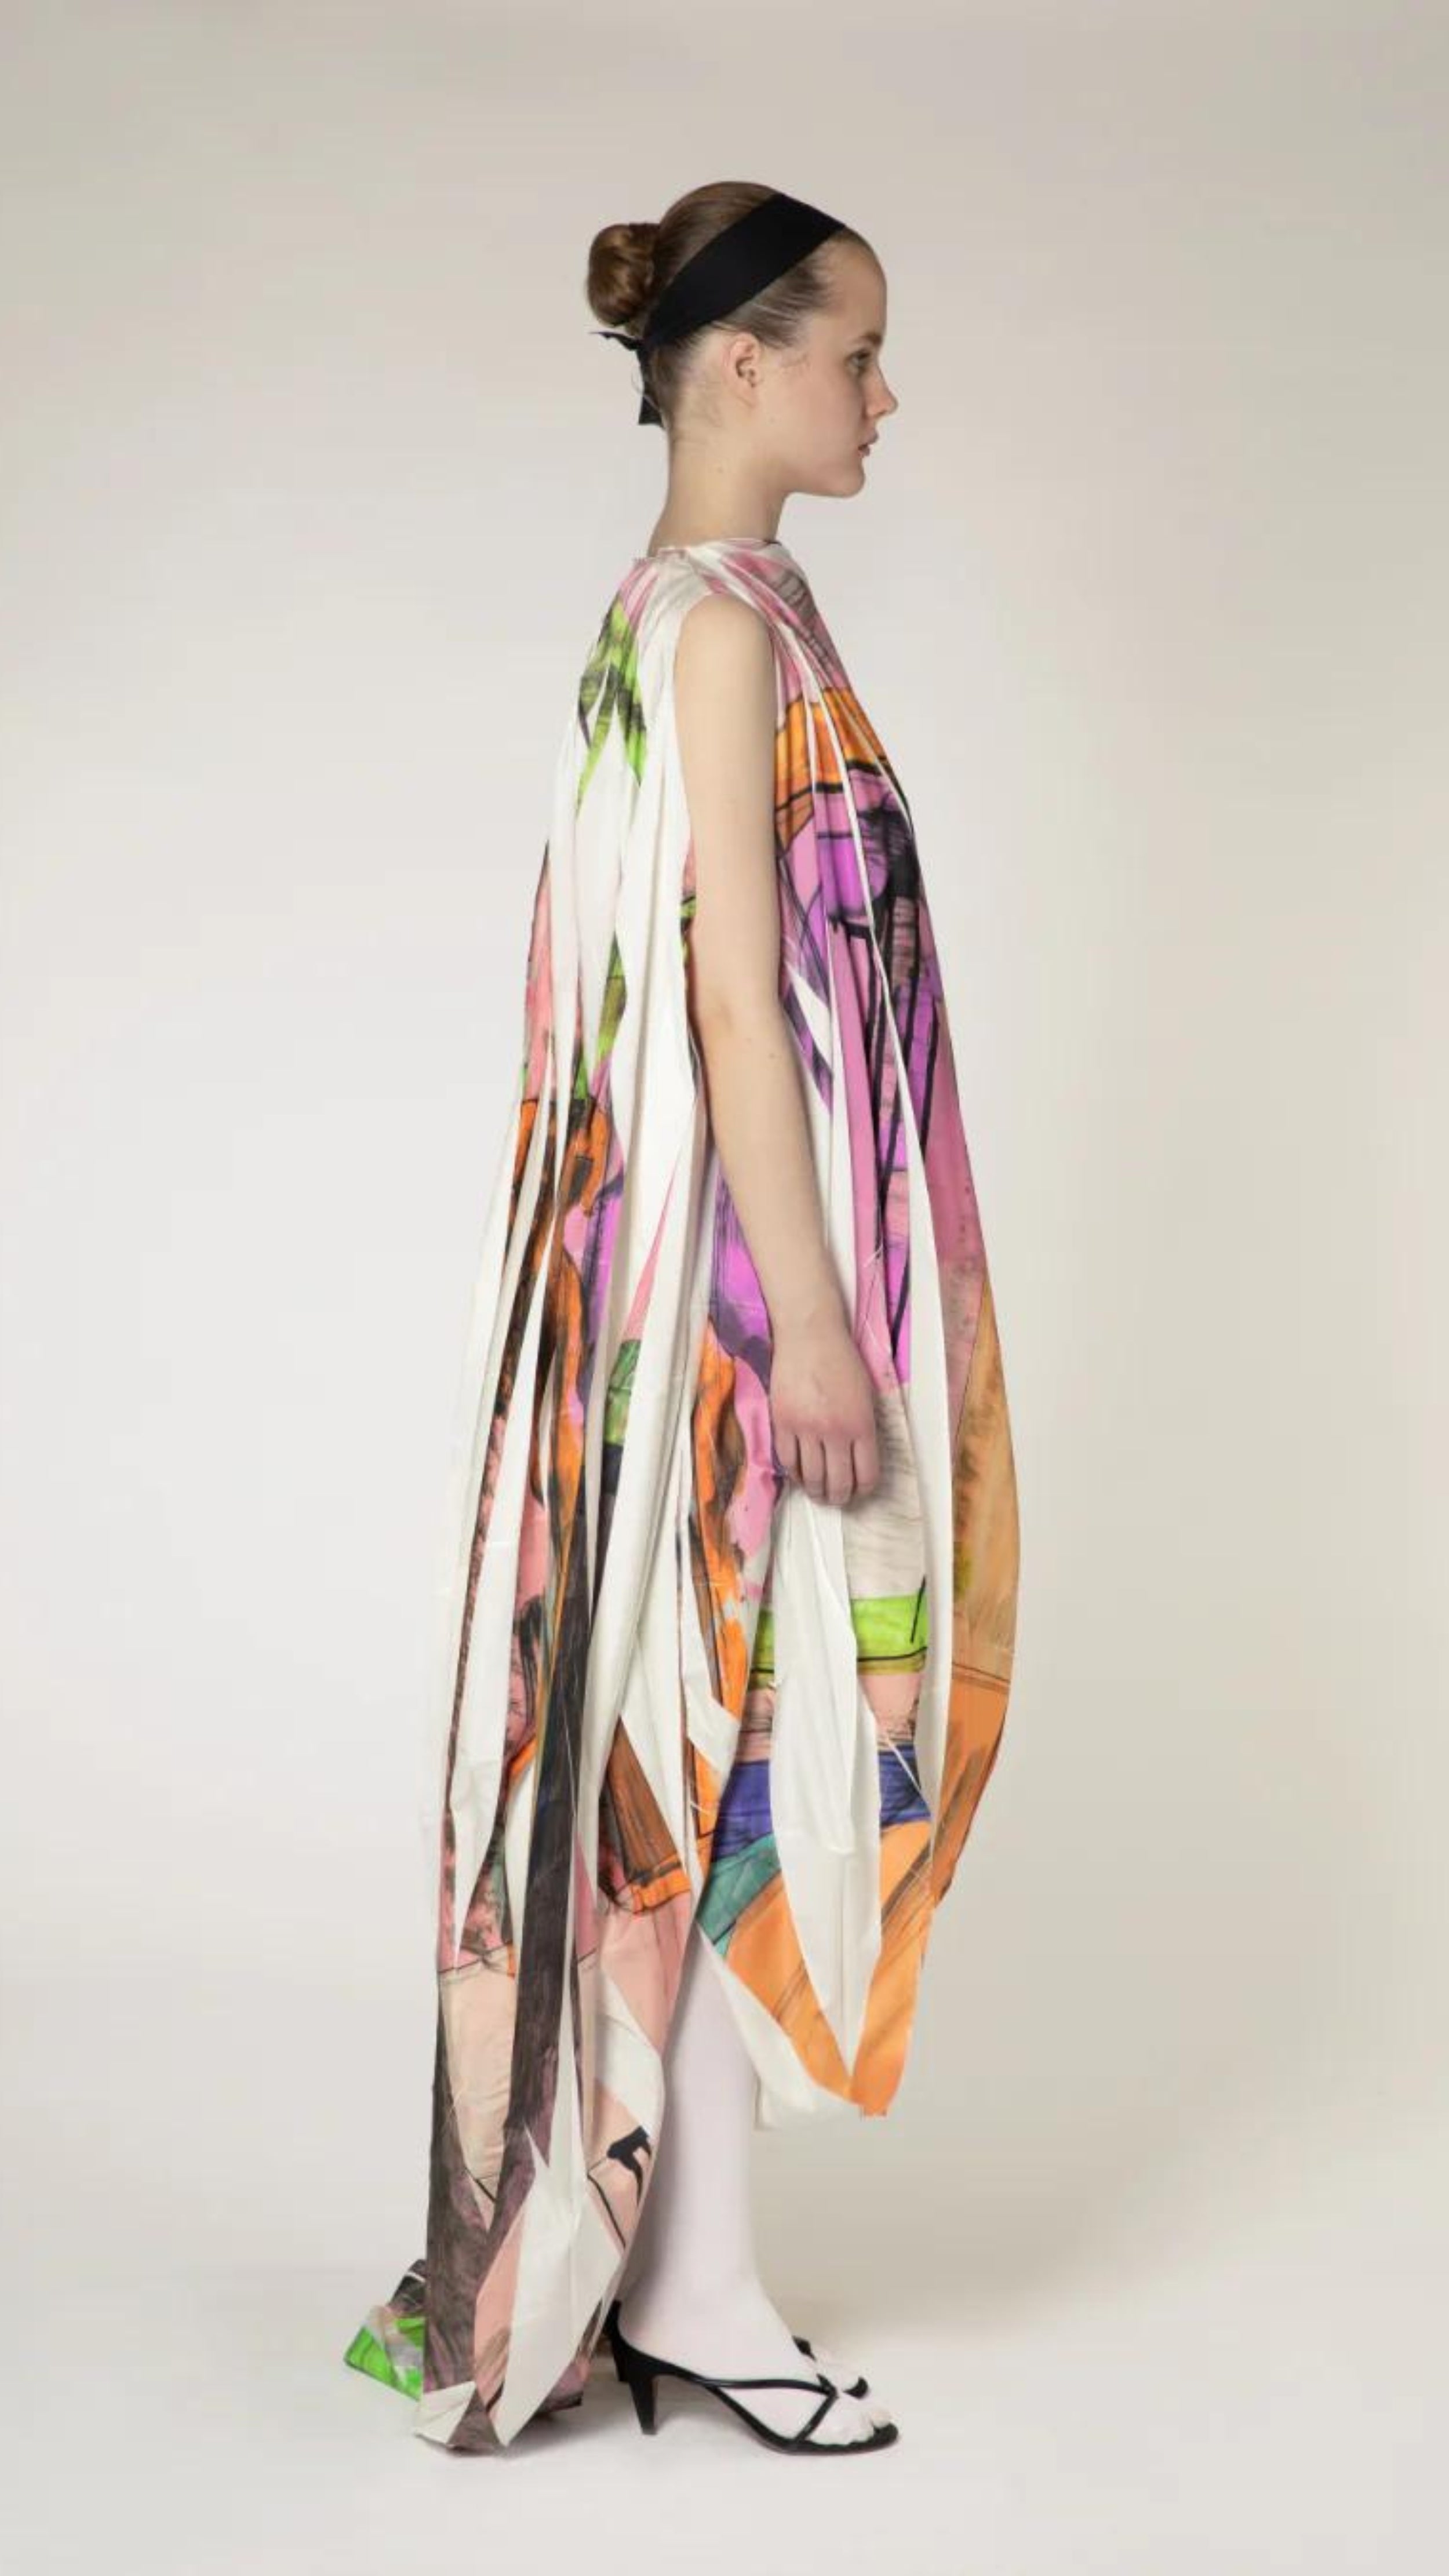 Roksanda Arletta Dress. Limited edition one of ten pieces created. Hand printed on parachute fabrics for an original pattern and designer of pinks, oranges, greens and white. Draped front with front belt and cape like back. Long maxi dress for evening gown looks. Shown on model facing side.